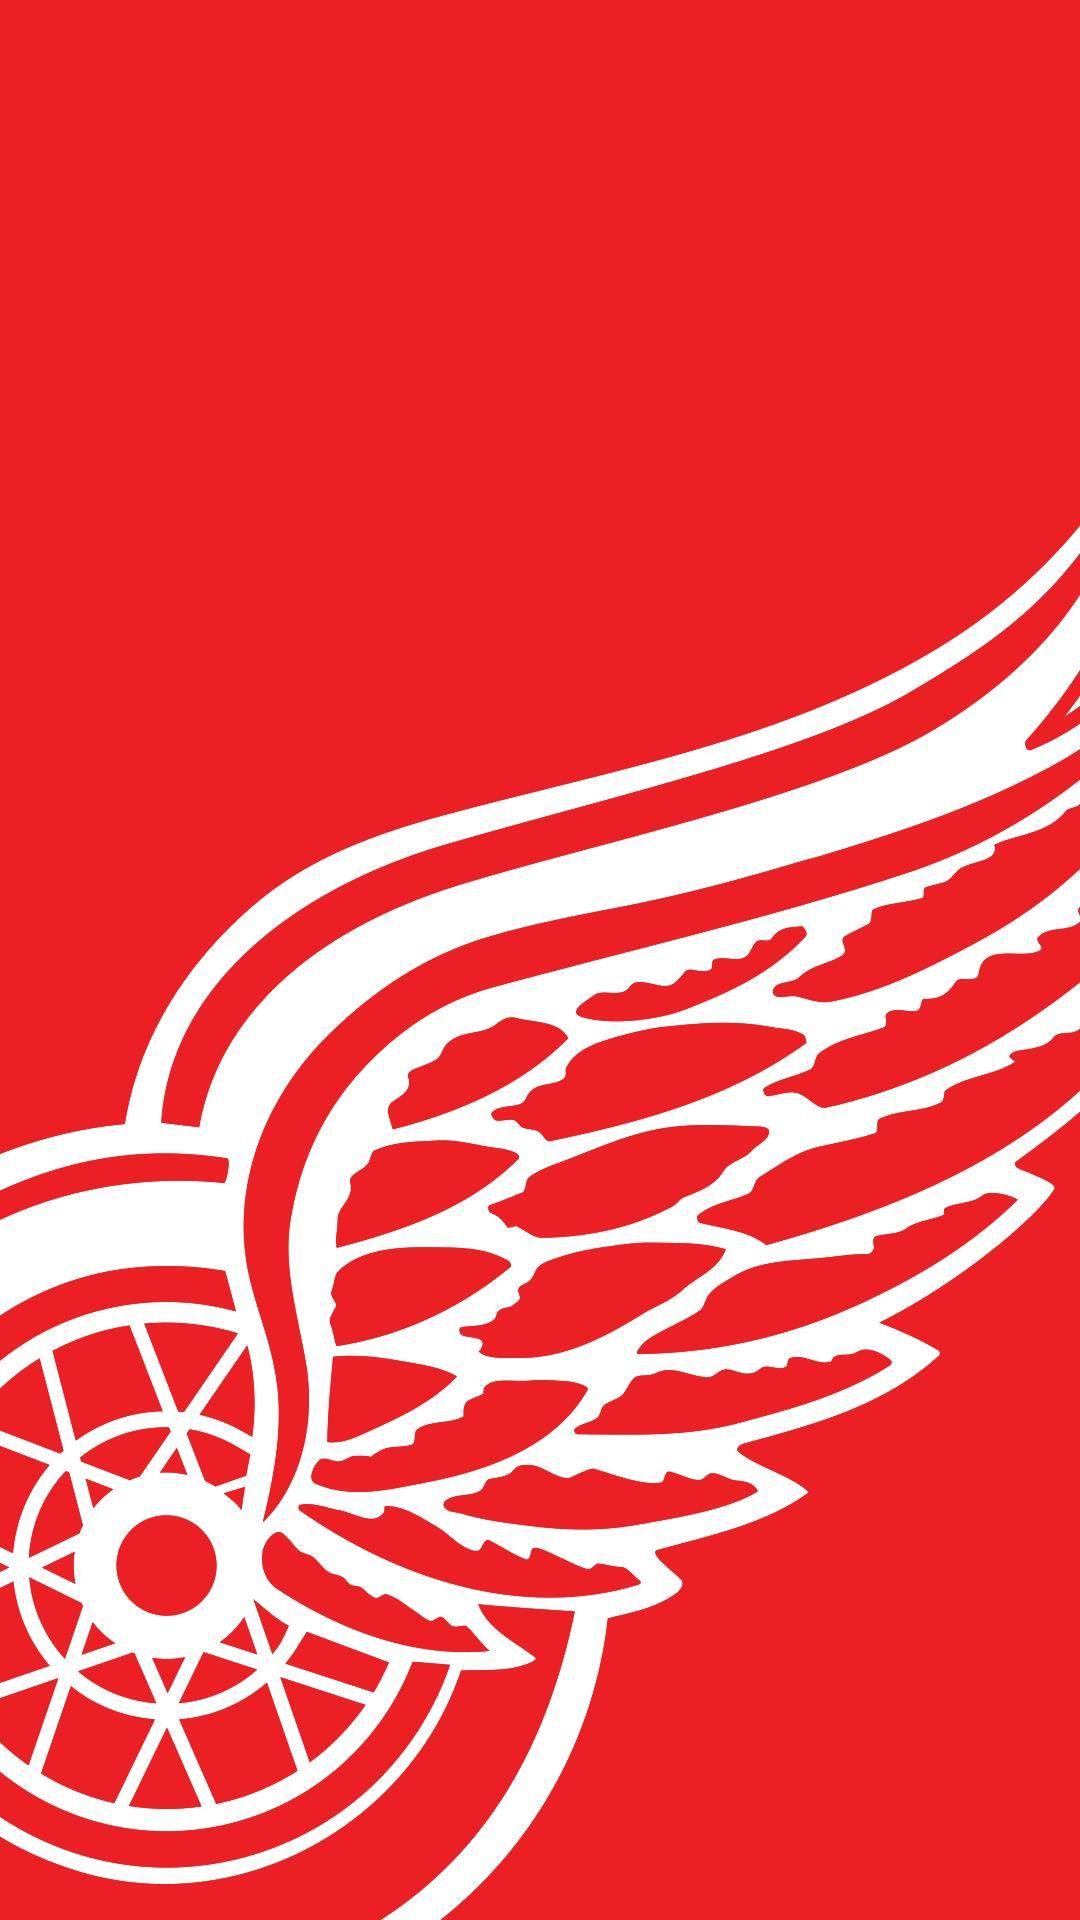 2023 Detroit Red Wings wallpaper – Pro Sports Backgrounds